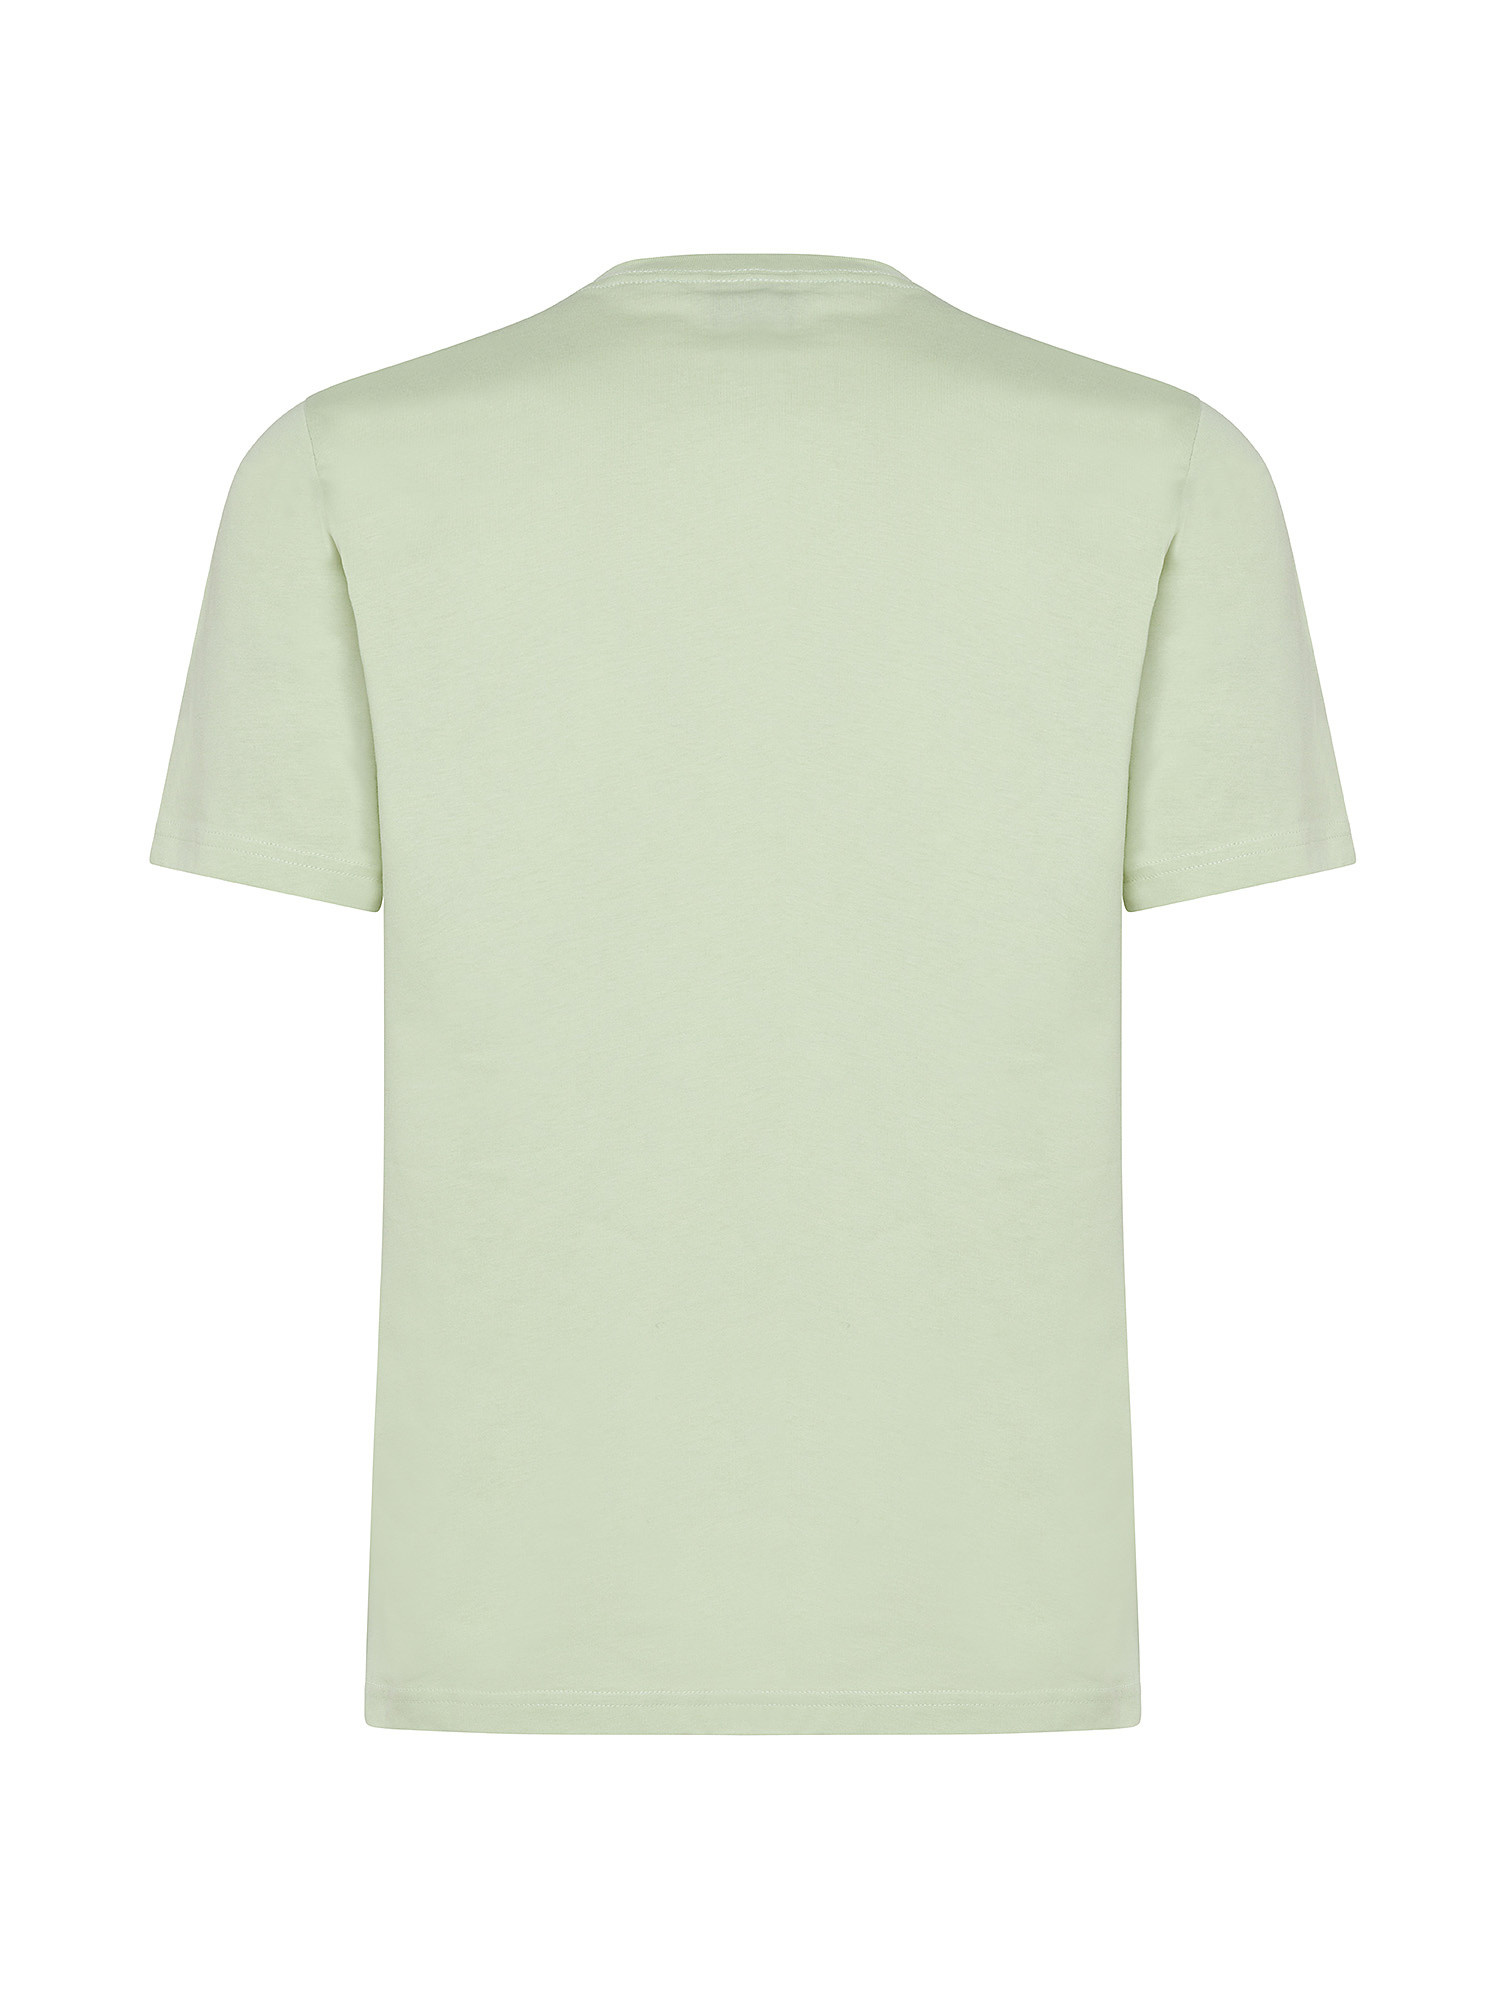 Paul Smith - T-shirt in cotone con stampa teschi, Verde, large image number 1